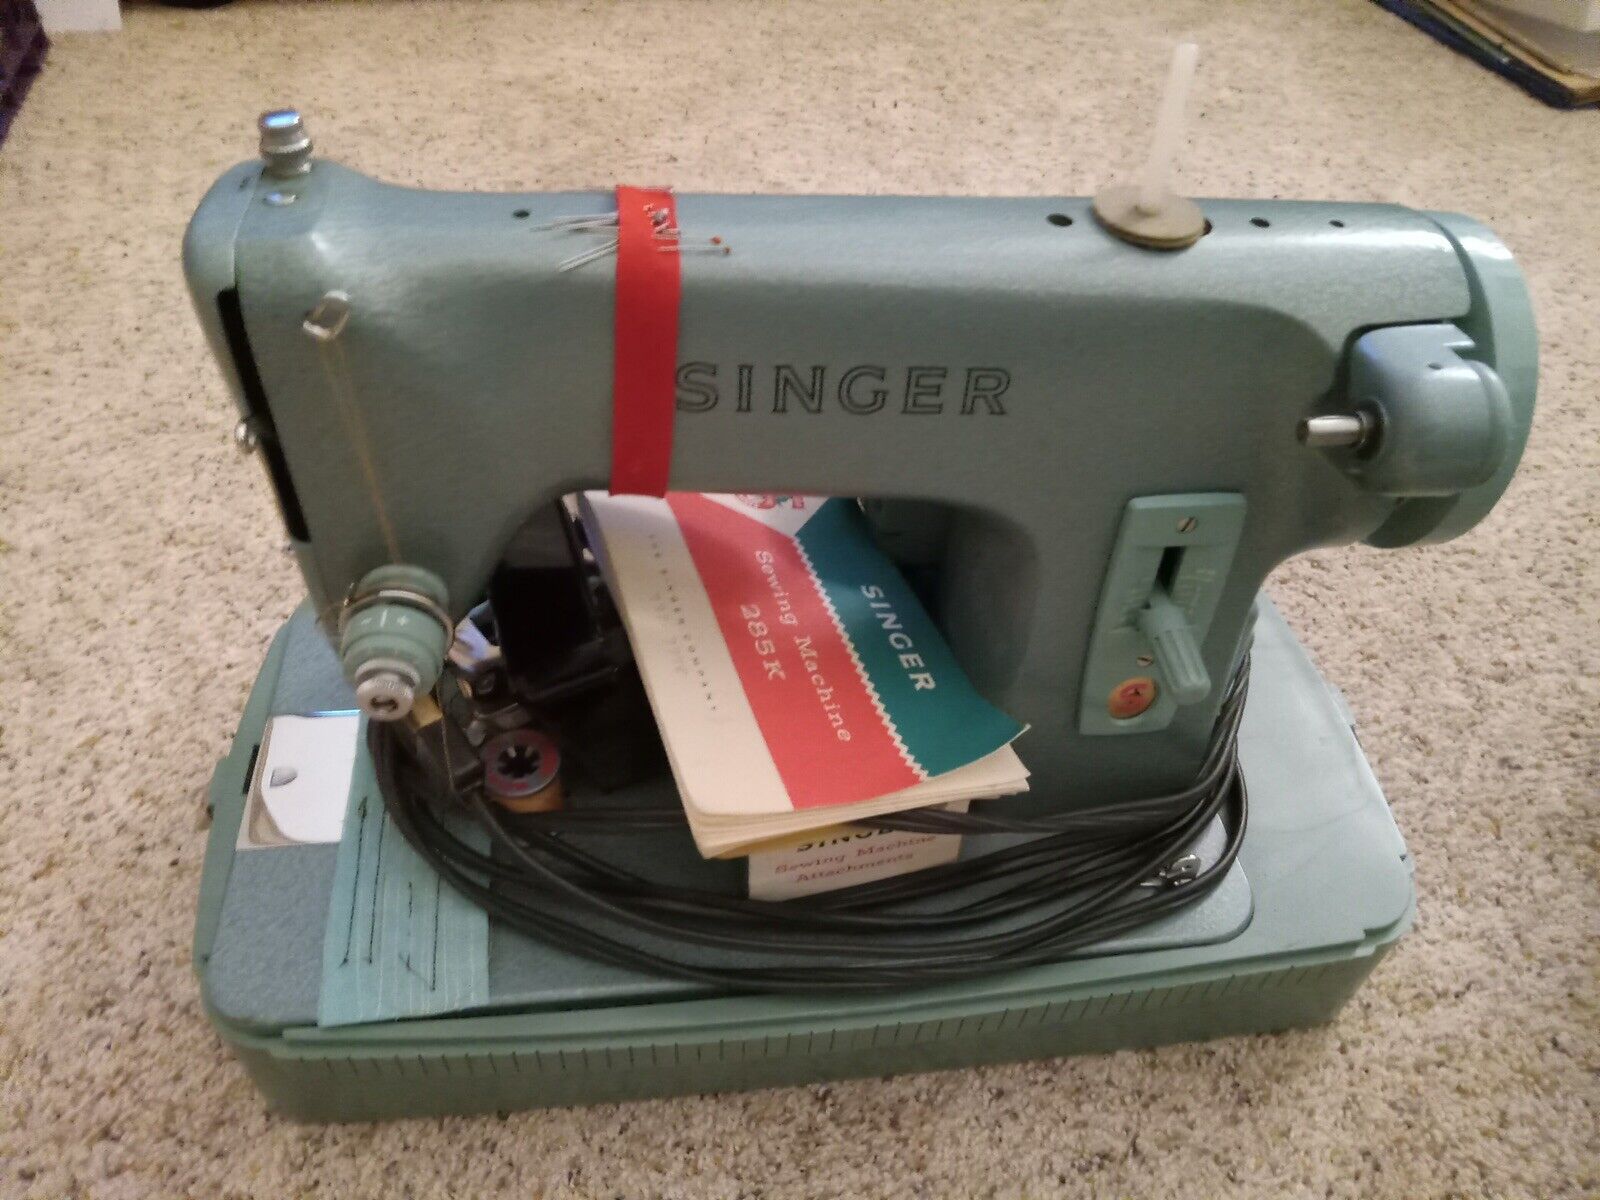 Vintage 1965 Singer Portable Sewing Machine in Mint Green